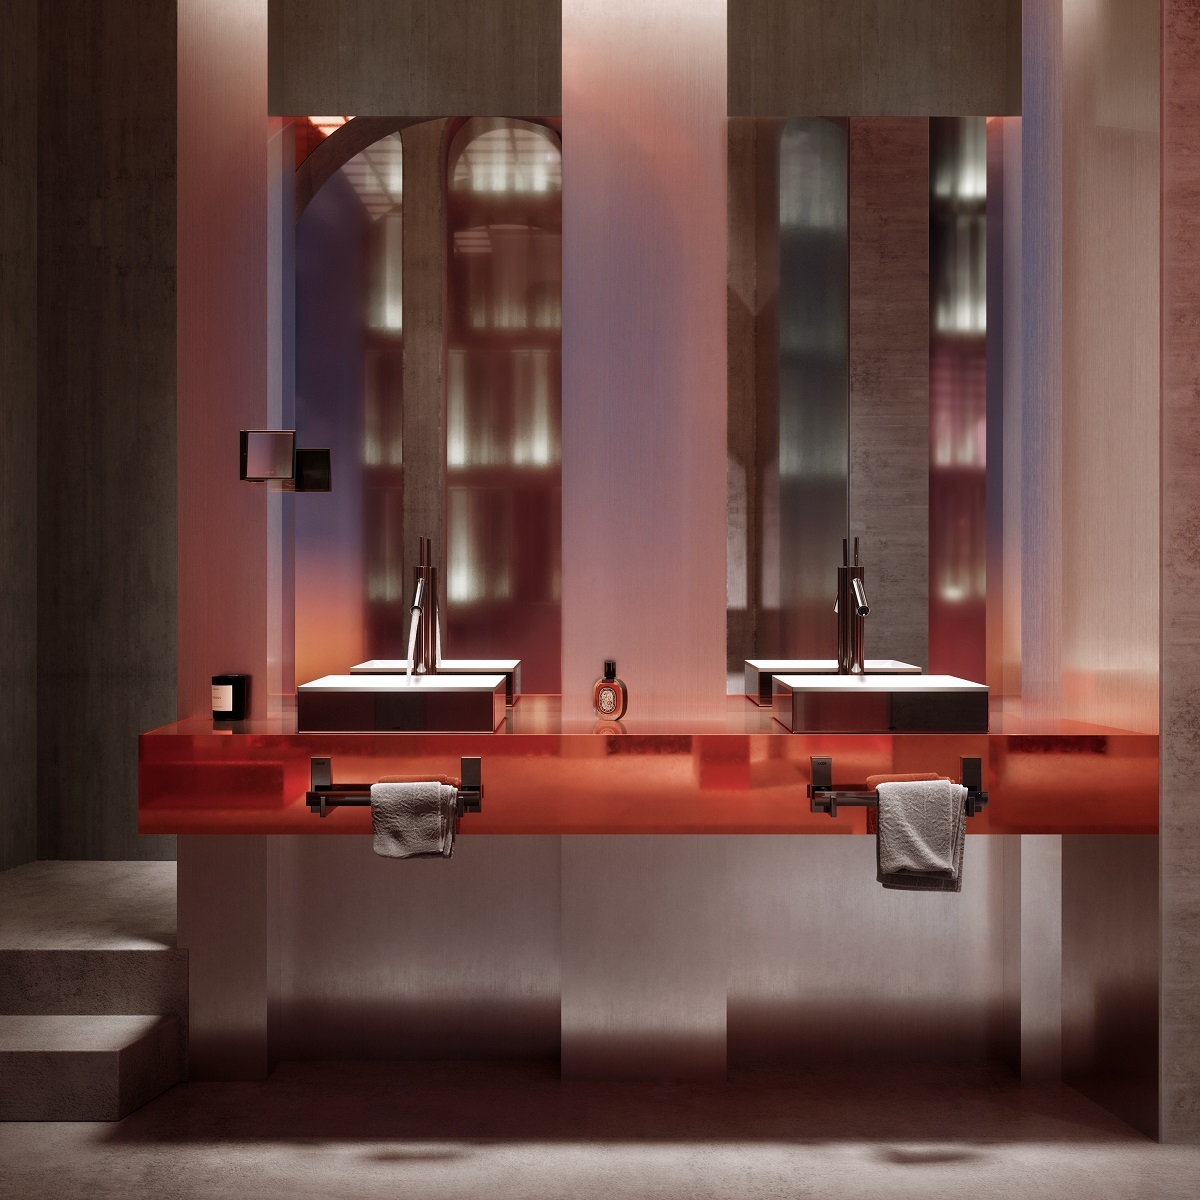 double vanity with AXOR Philippe Starke basins in front of arched shelving and mirrors